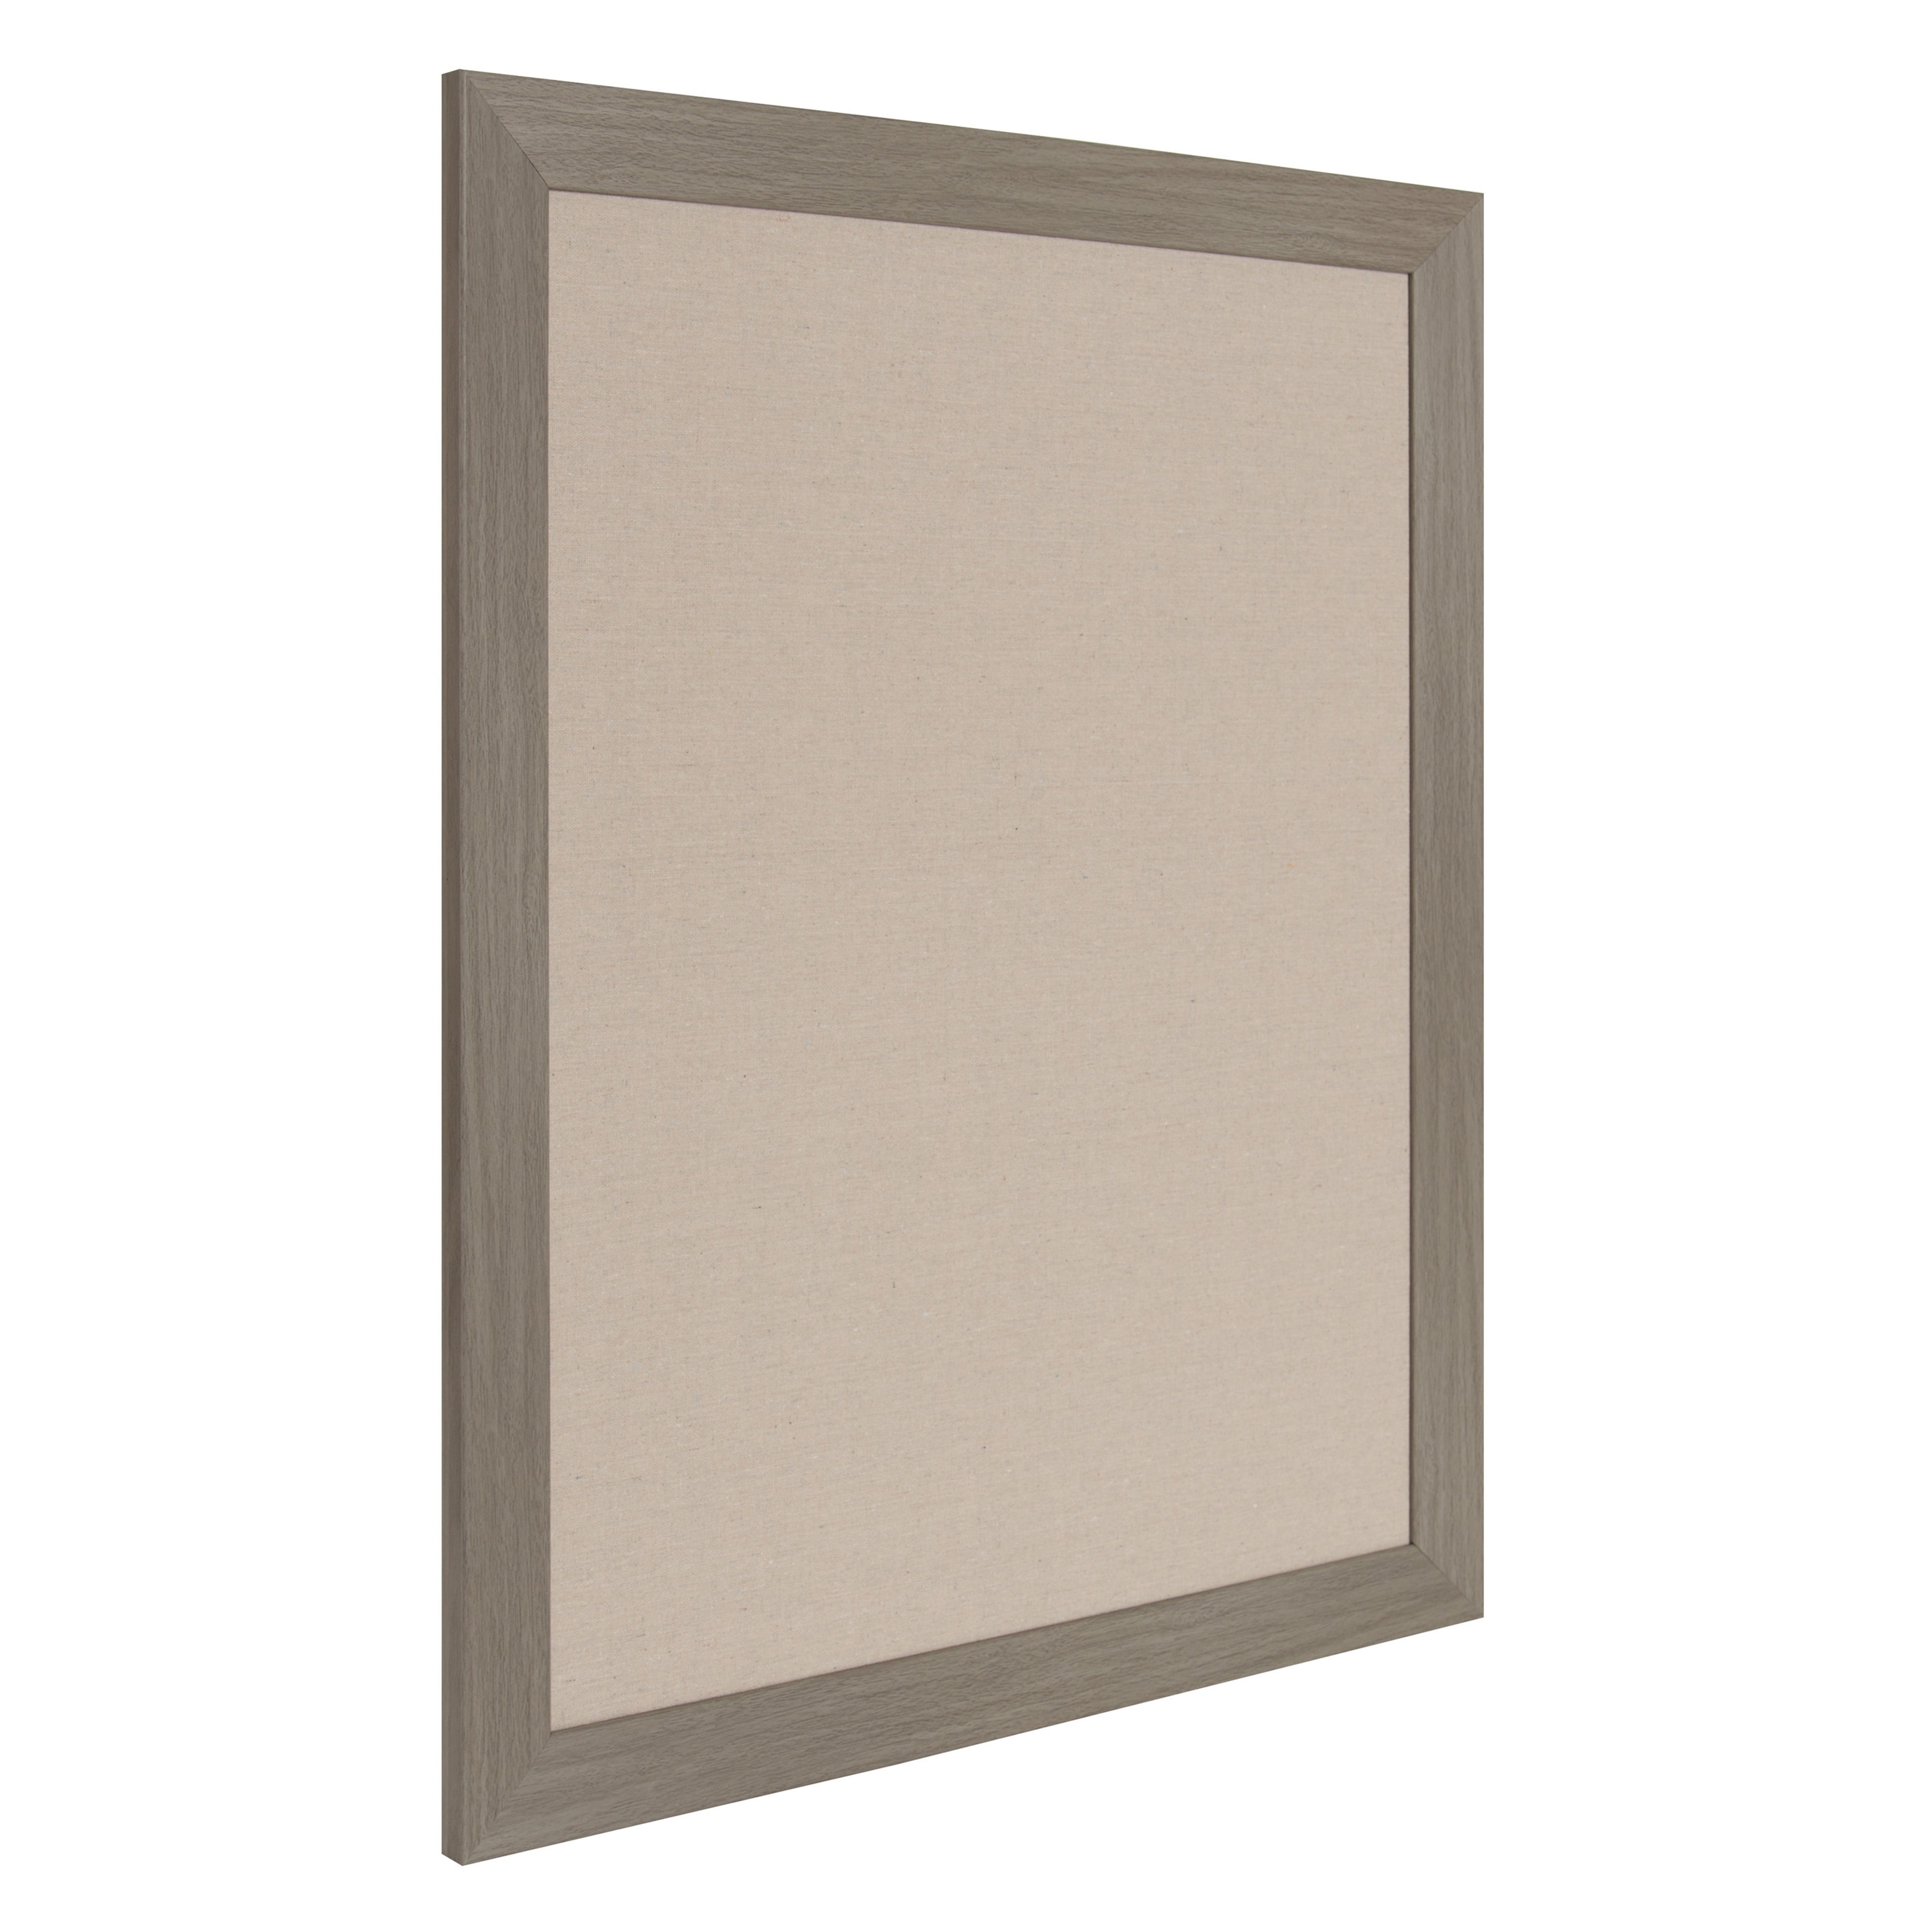 DesignOvation Beatrice Framed Linen Fabric Pinboard Rustic Brown (18x27)(As  Is Item) Bed Bath  Beyond 24148107